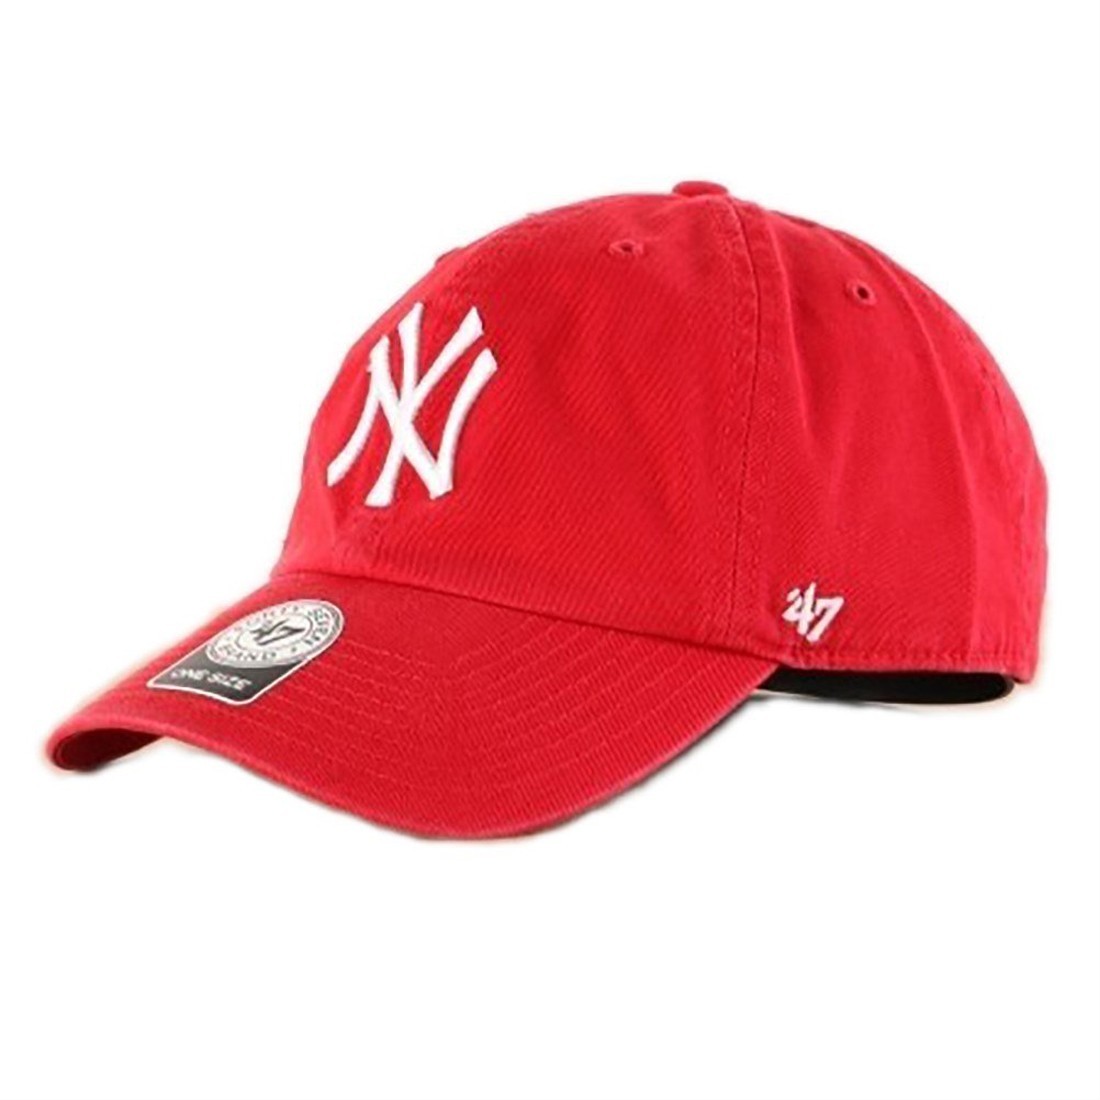 Shop B-RGW17GWS-RD CAP NEW YORK YANKEES - 47, delivered to your home |  TheOutfit